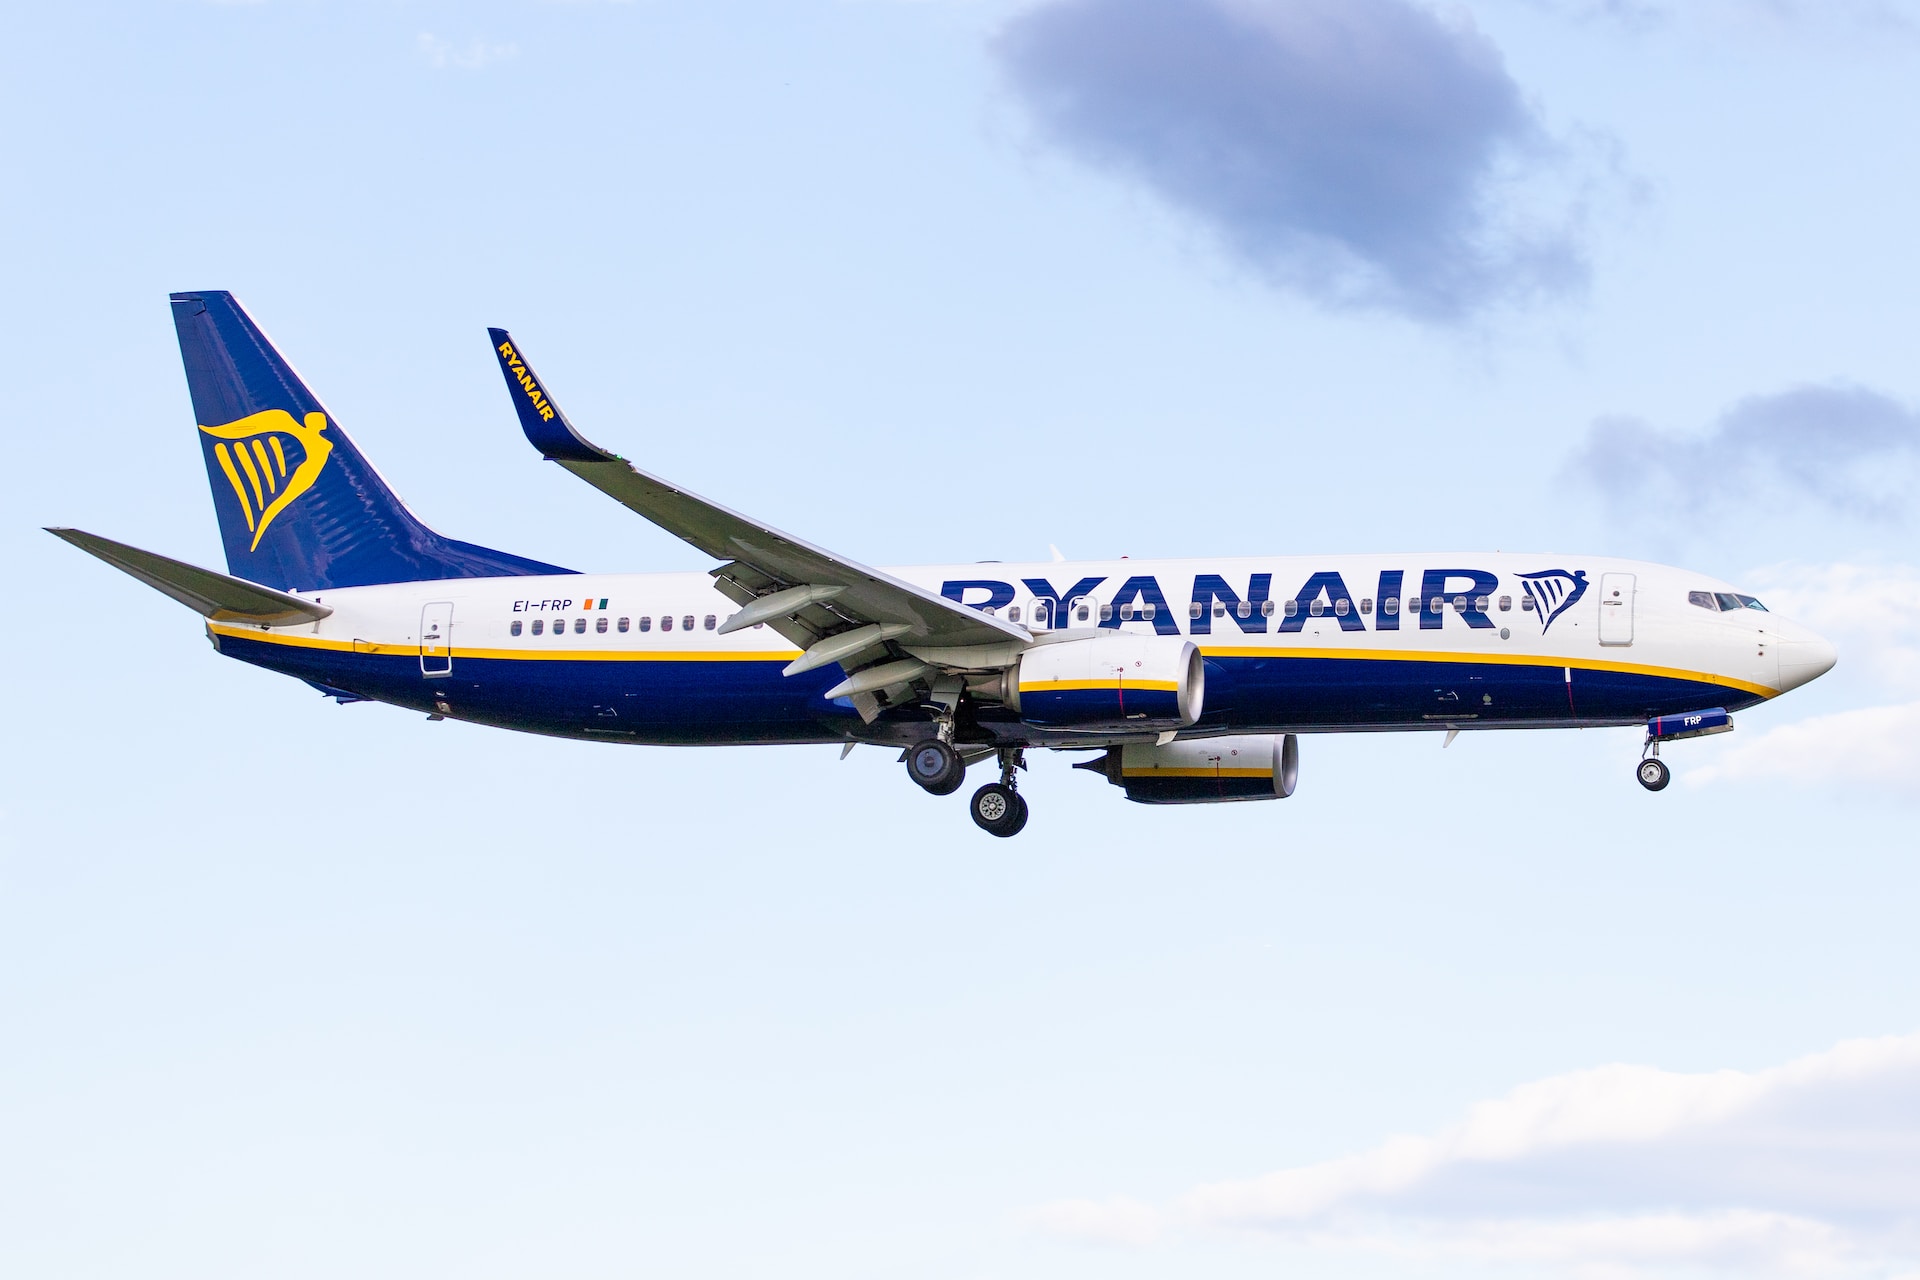 Mixed news about Ryanair